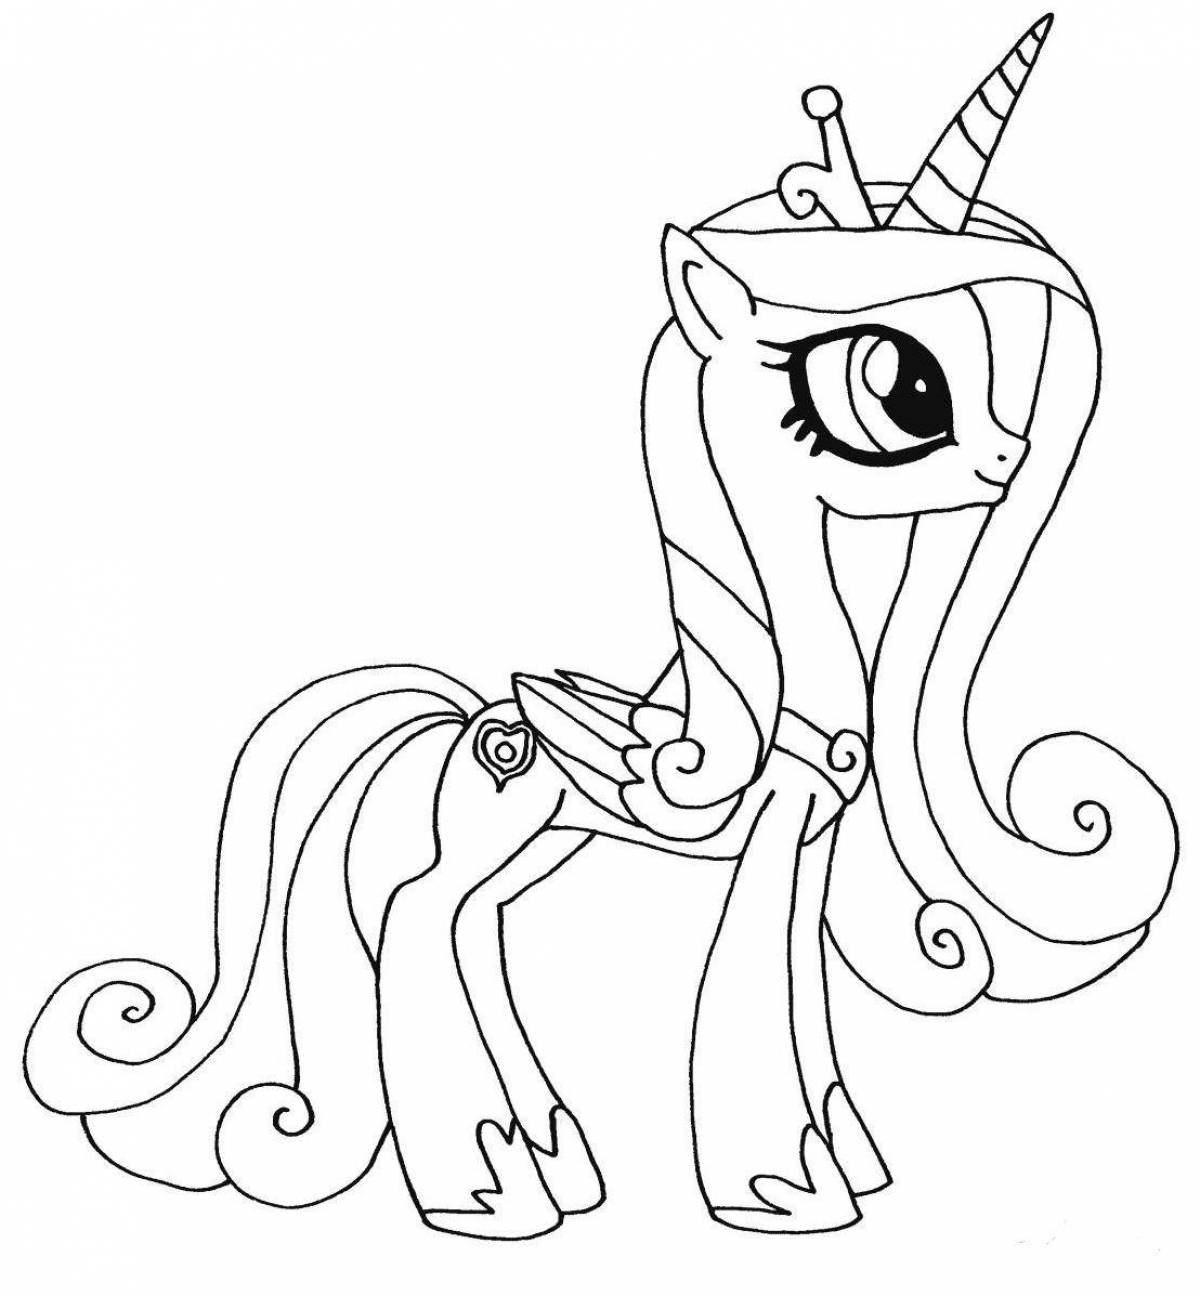 My little pony princess's coloring book